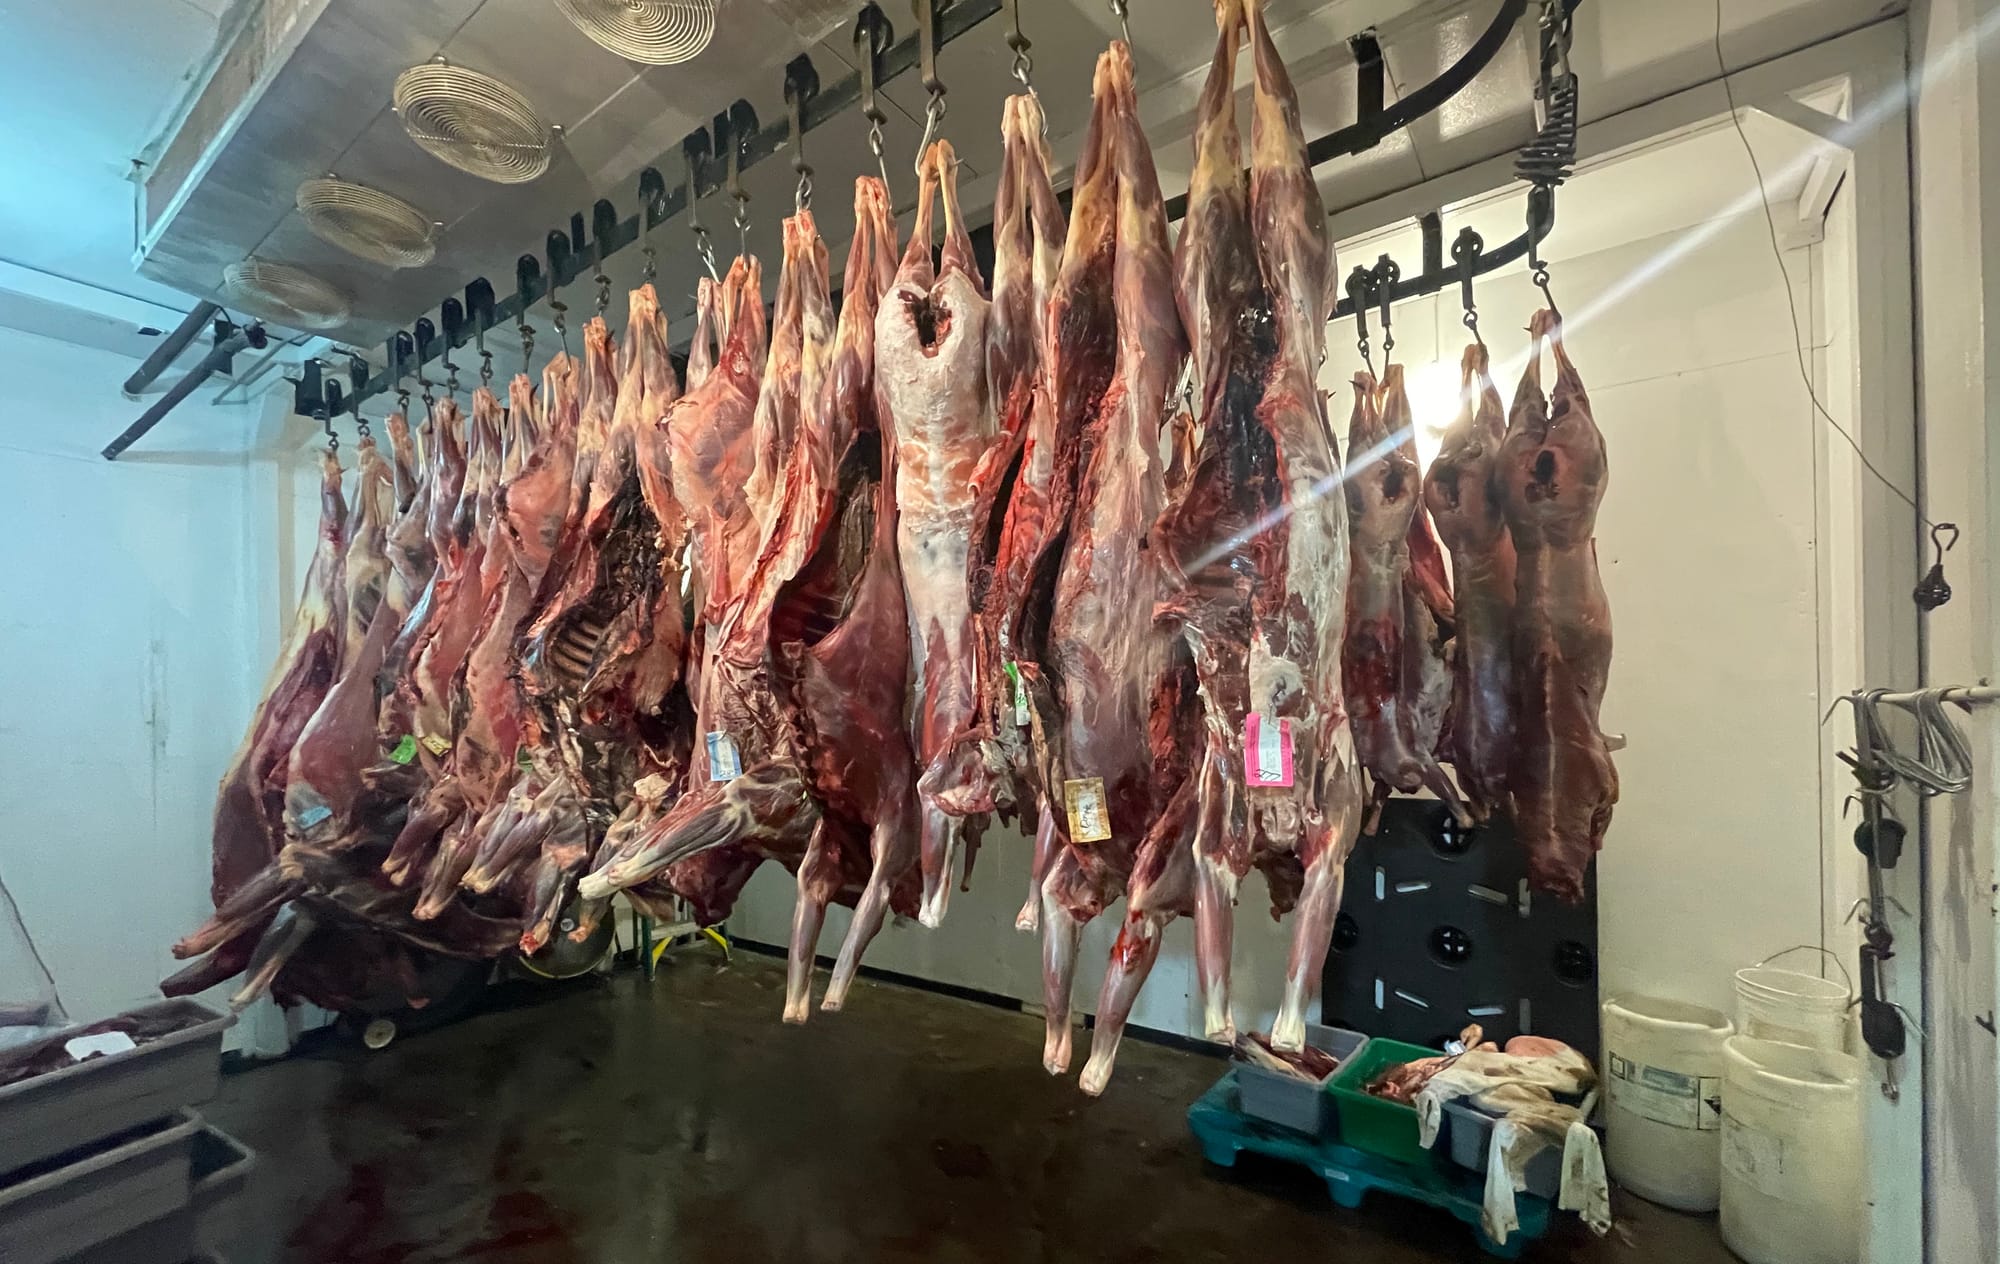 Skinned deer carcasses hang in a cooler at Cutting Edge Meat Market in Piedmont, South Dakota.